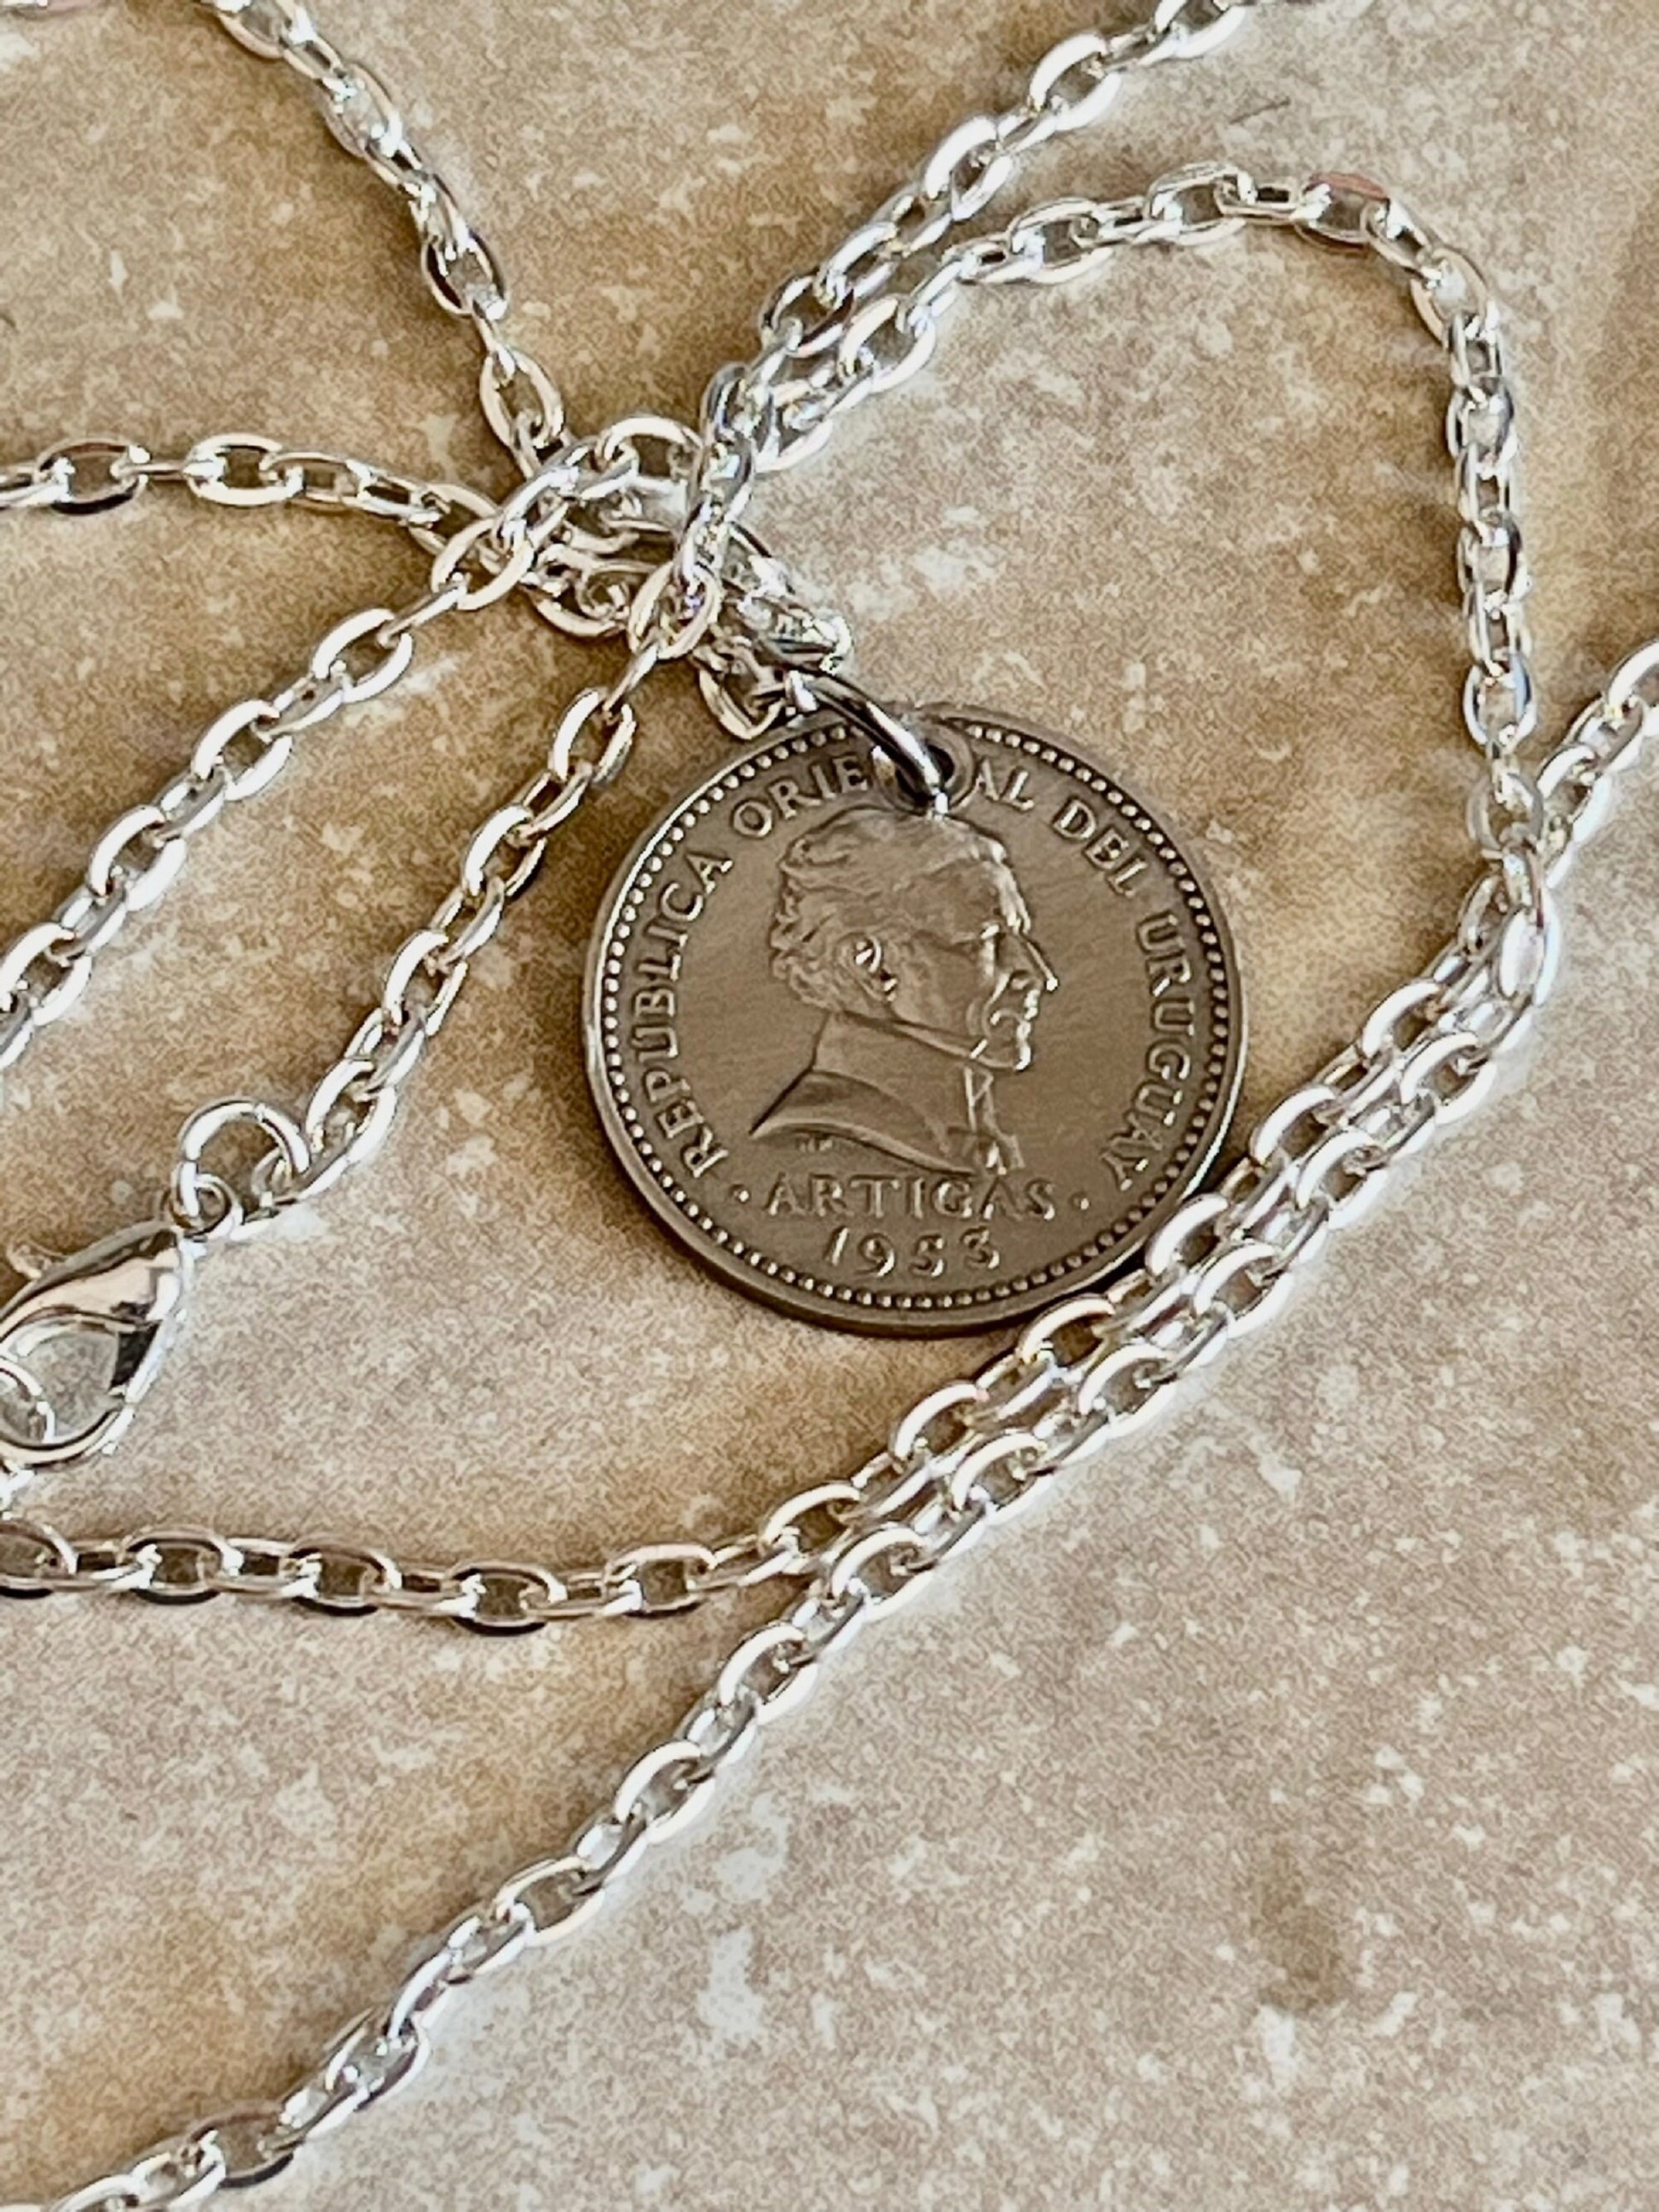 Uruguay Coin Necklace Uruguayan 10 Centimos Pendant Personal Old Vintage Handmade Jewelry Gift Friend Charm For Him Her World Coin Collector